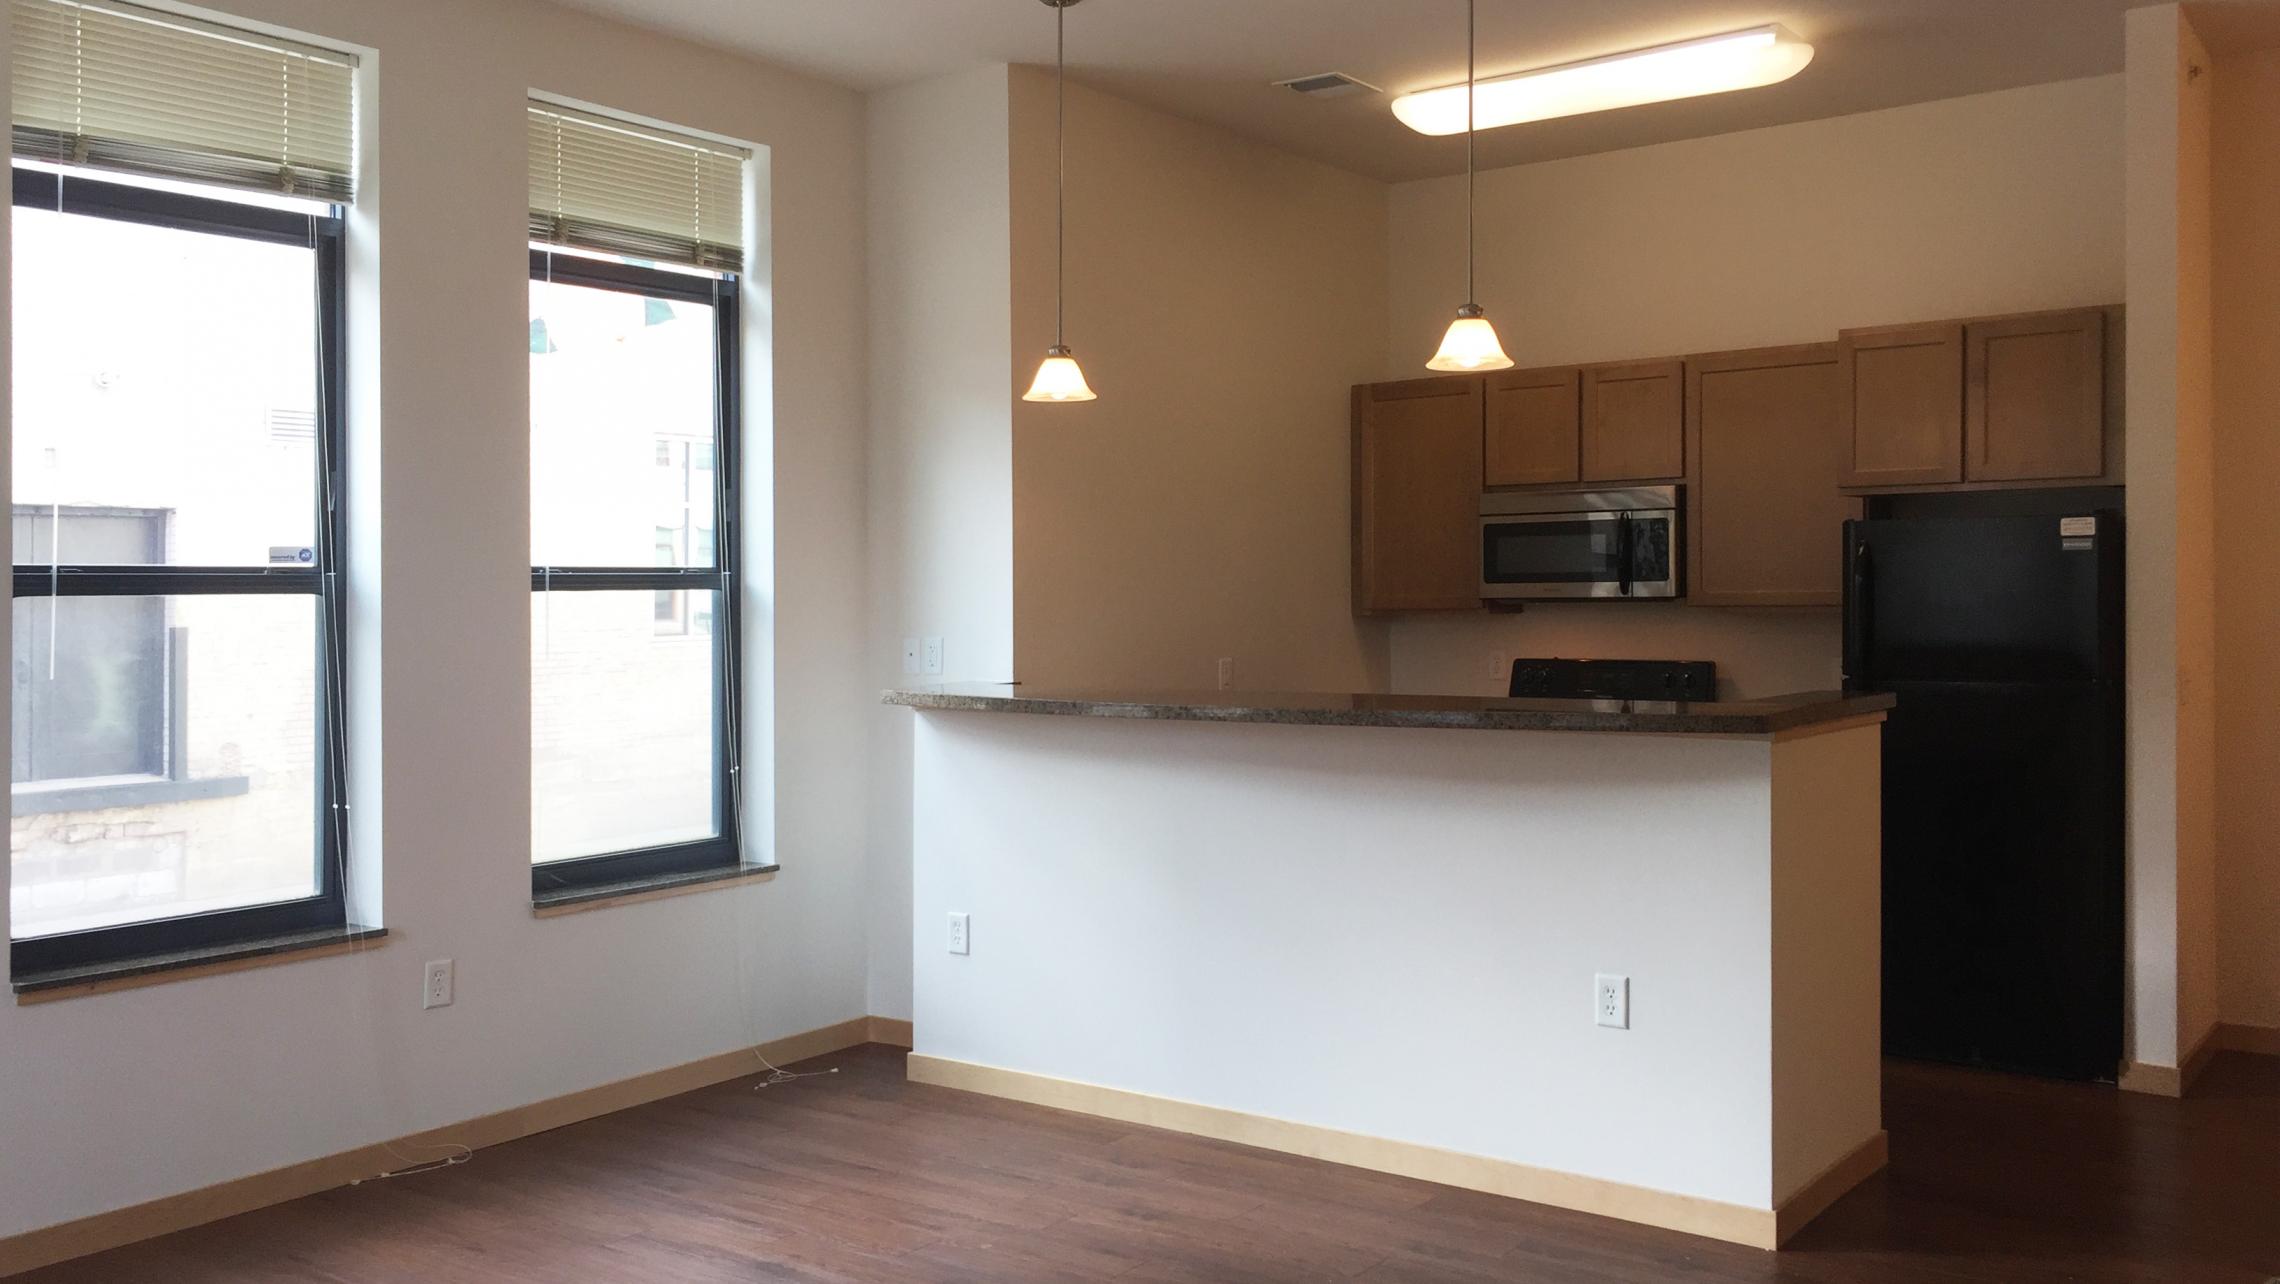 The-Depot-Apartment-3-608-Two-Bedroom-Townhome-Kitchen-Living-Bathroom-Bathtub-Rooftop-Terrace-Fitness-Downtown-Madison-Capitol-Bike-Trails-Cats-Lifestyle-City-Lake-Balcony-Views